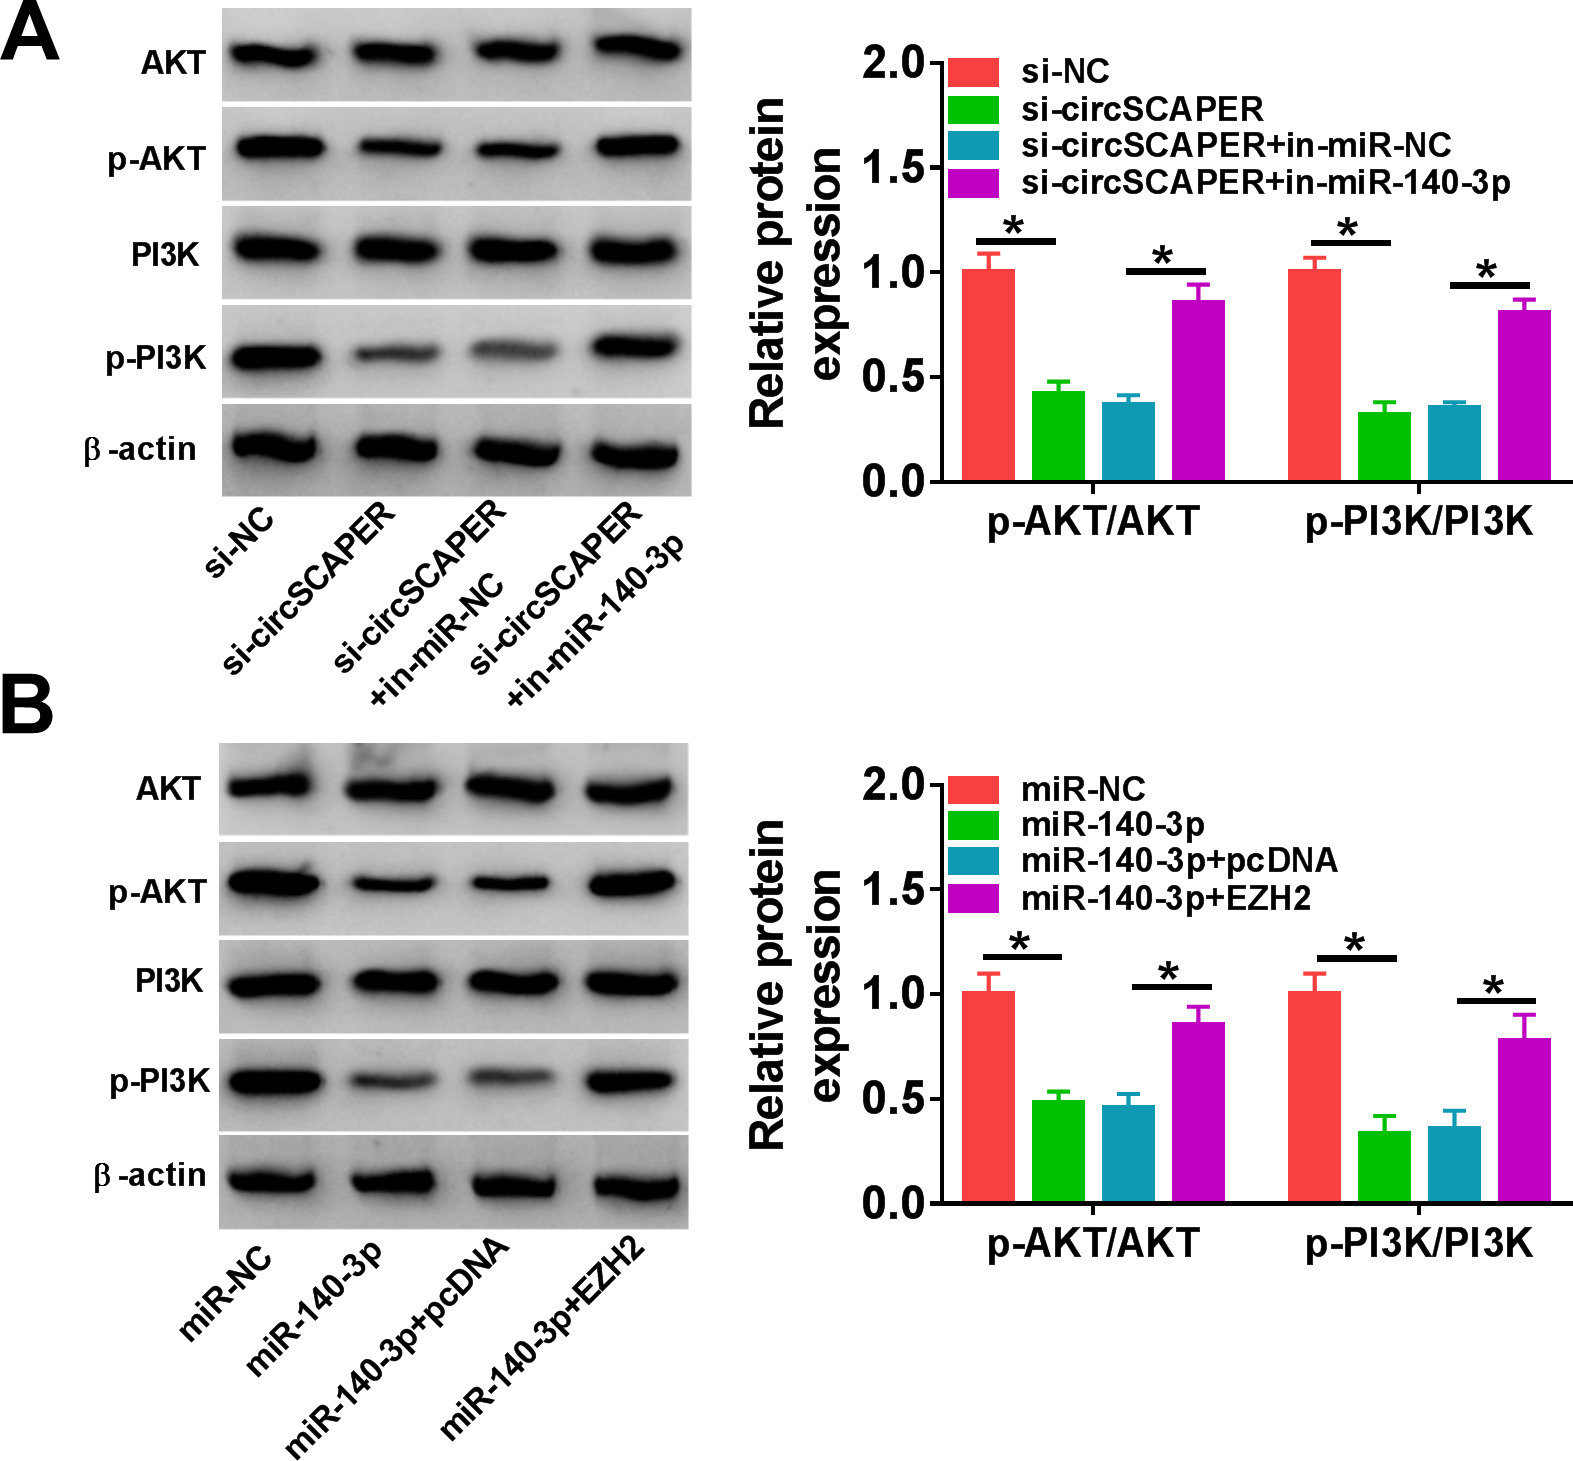 Fig. 7 
            CircSCAPER can activate the phosphoinositide 3-kinase (PI3K)/protein kinase B (AKT) pathway through the microRNA (miR)-140-3p/enhancer of zeste homolog 2 (EZH2) axis. a) Western blot analysis of p-AKT and p-PI3K levels in C28/I2 cells transfected with circSCAPER-specific small interfering RNA (siRNA) (si-circSCAPER), si-negative control (NC), si-circSCAPER+in-miR-NC, or si-circSCAPER+in-miR-140-3p in the presence of interleukin (IL)-1β. b) Western blot analysis of p-AKT and p-PI3K levels in C28/I2 cells transfected with miR-NC, miR-140-3p, miR-140-3p+pcDNA, or miR-140-3p+EZH2 in the presence of IL-1β. One-way analysis of variance, *p < 0.05. All of the experiments were performed in triplicate.
          